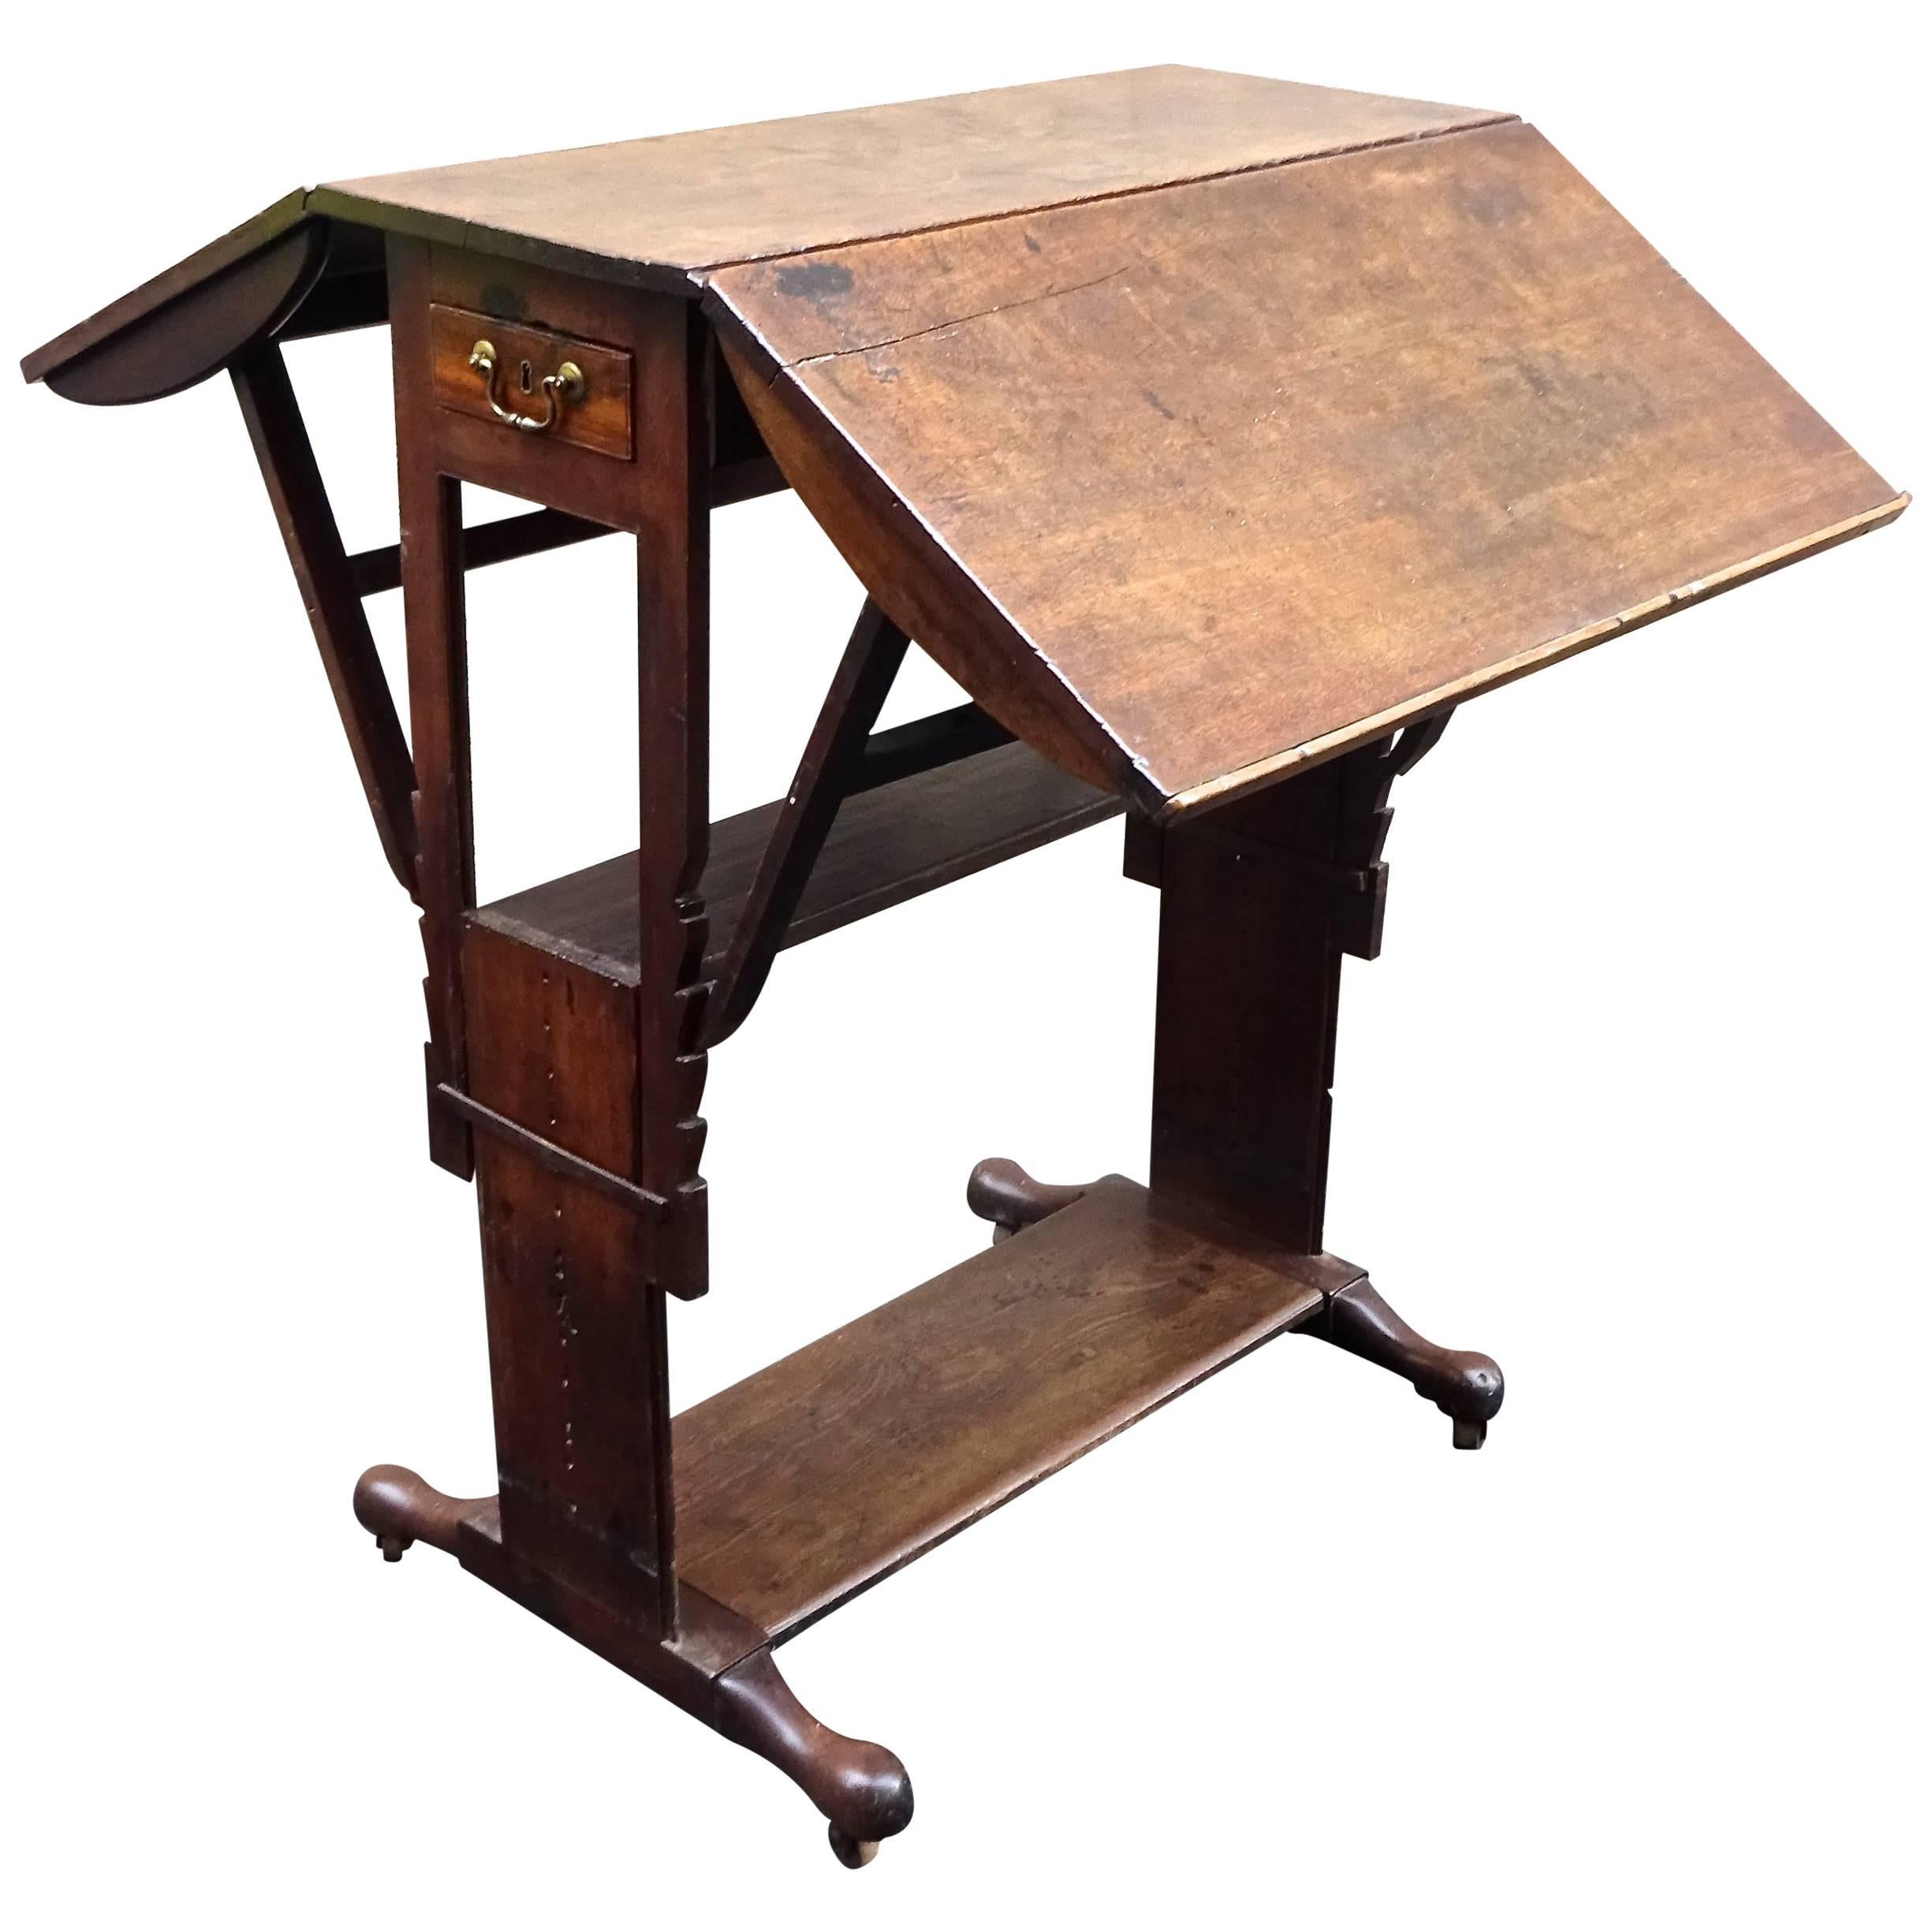 Exceptional Rare Early 18th Century English Walnut Industrial Drafting Table